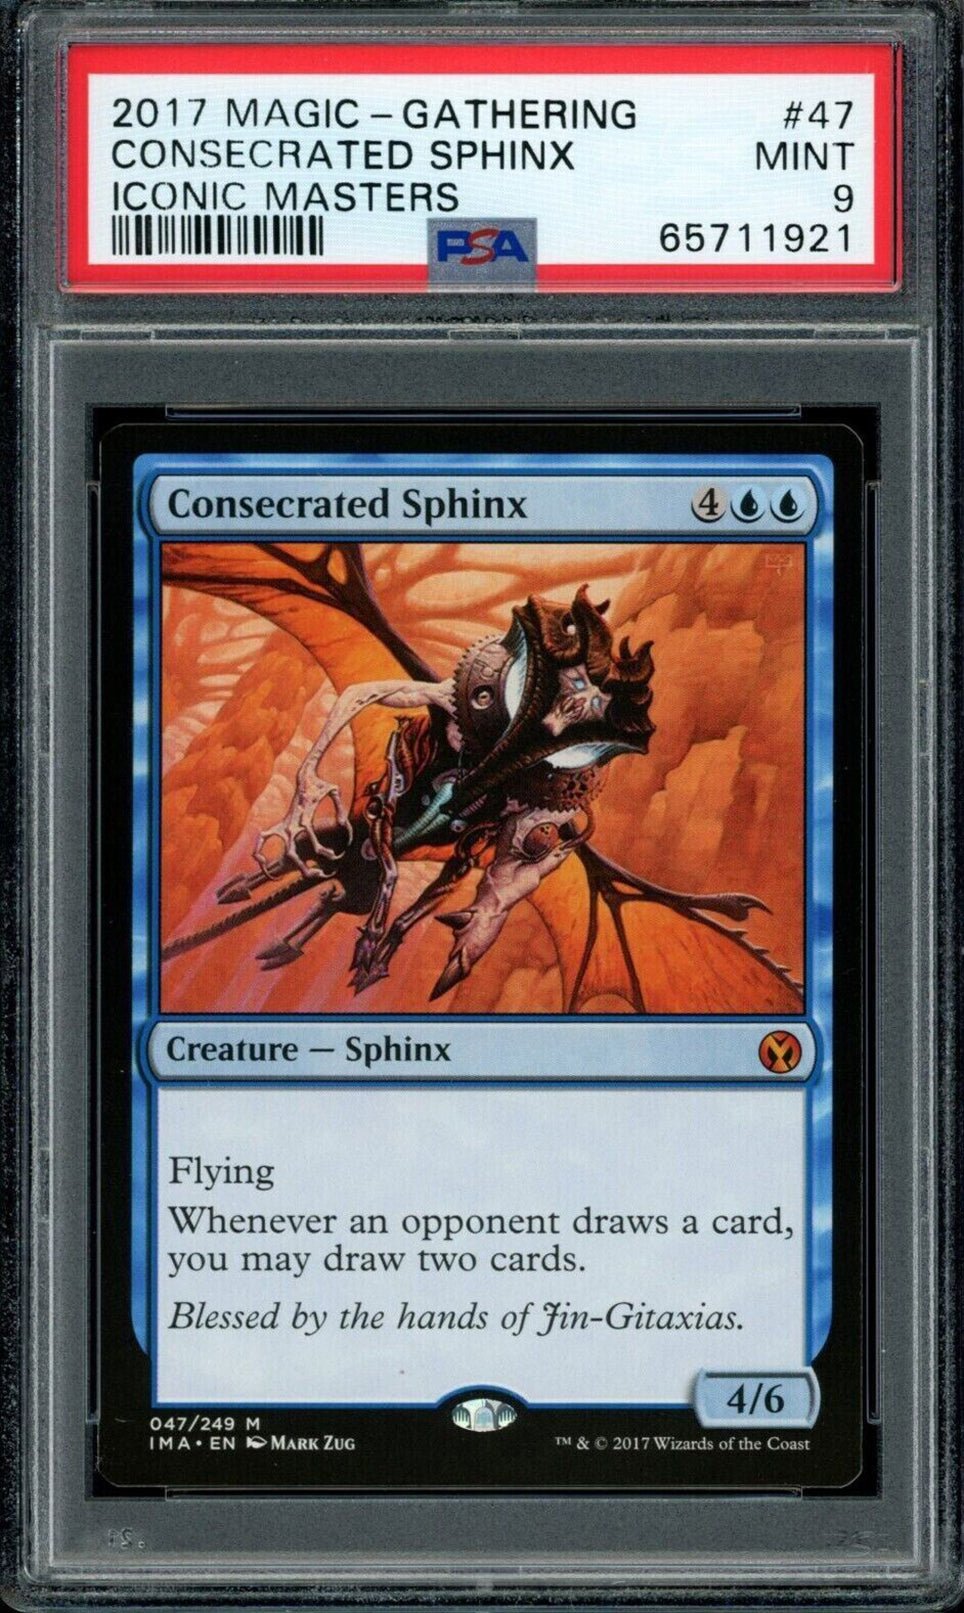 CONSECRATED SPHINX PSA 9 2017 Iconic Masters Magic the Gathering Mythic 47 Magic the Gathering Base Graded Cards - Hobby Gems